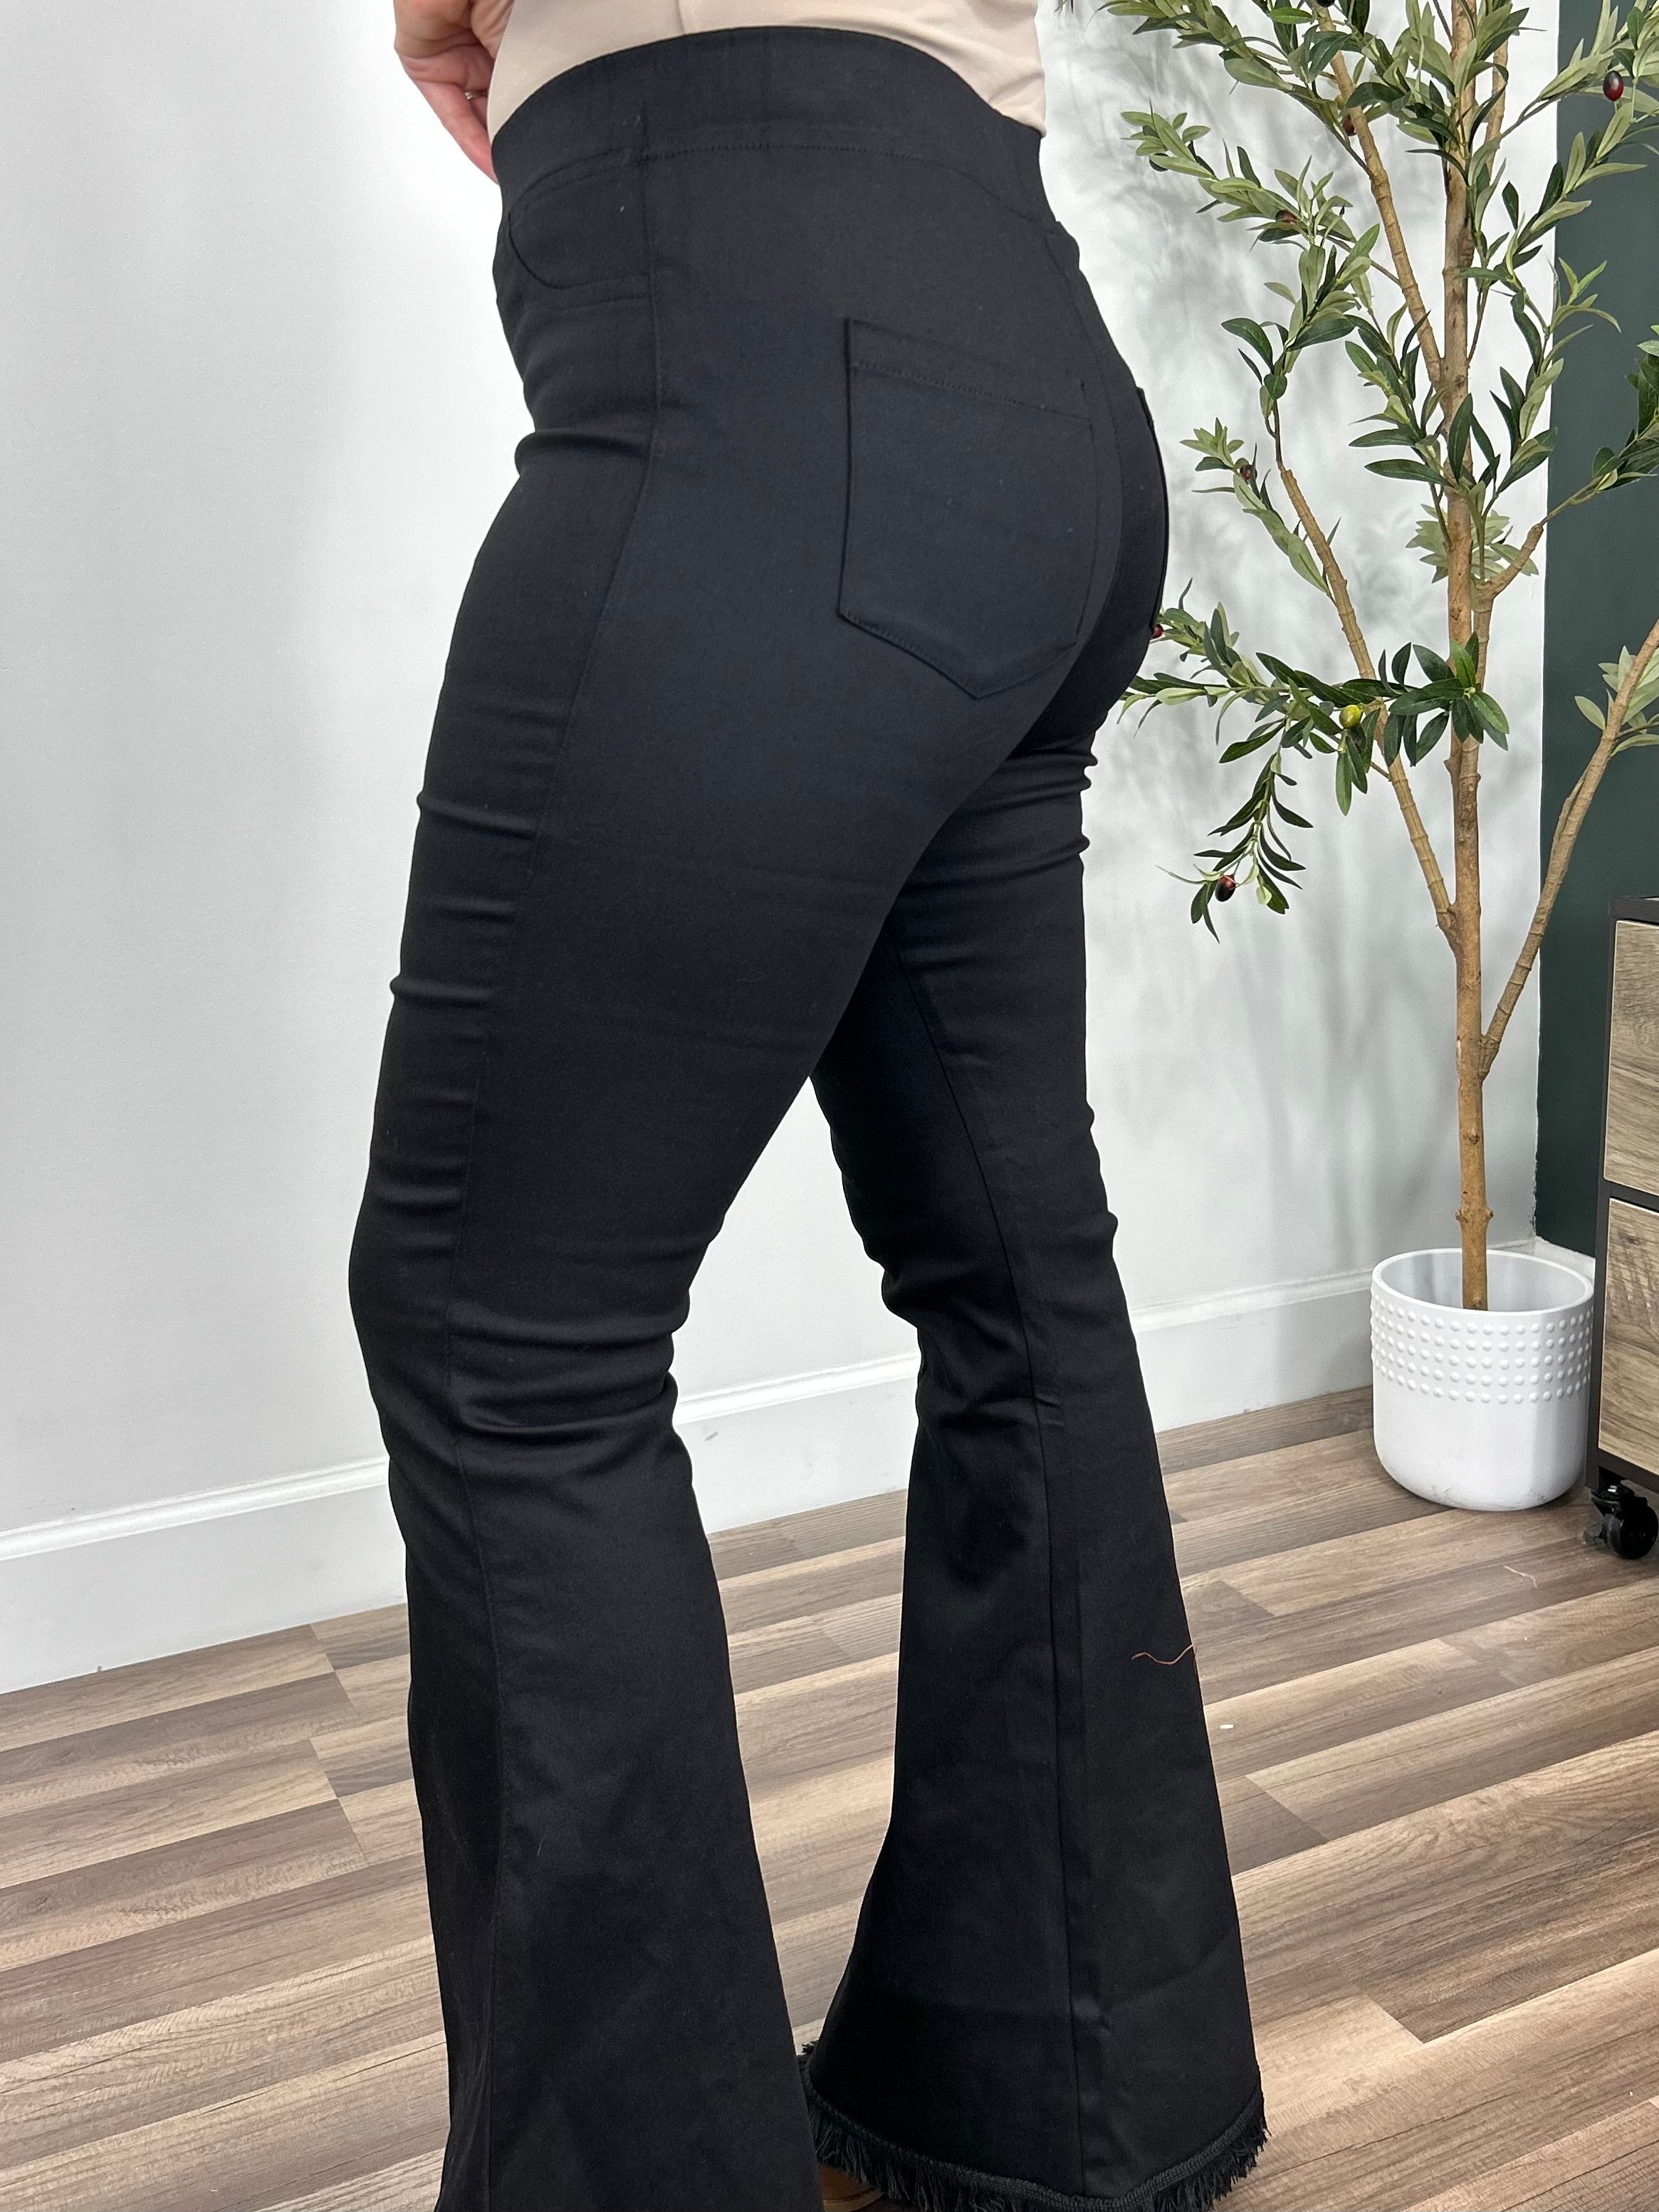 Olivia Flare Leg Jegging in black side and back view.